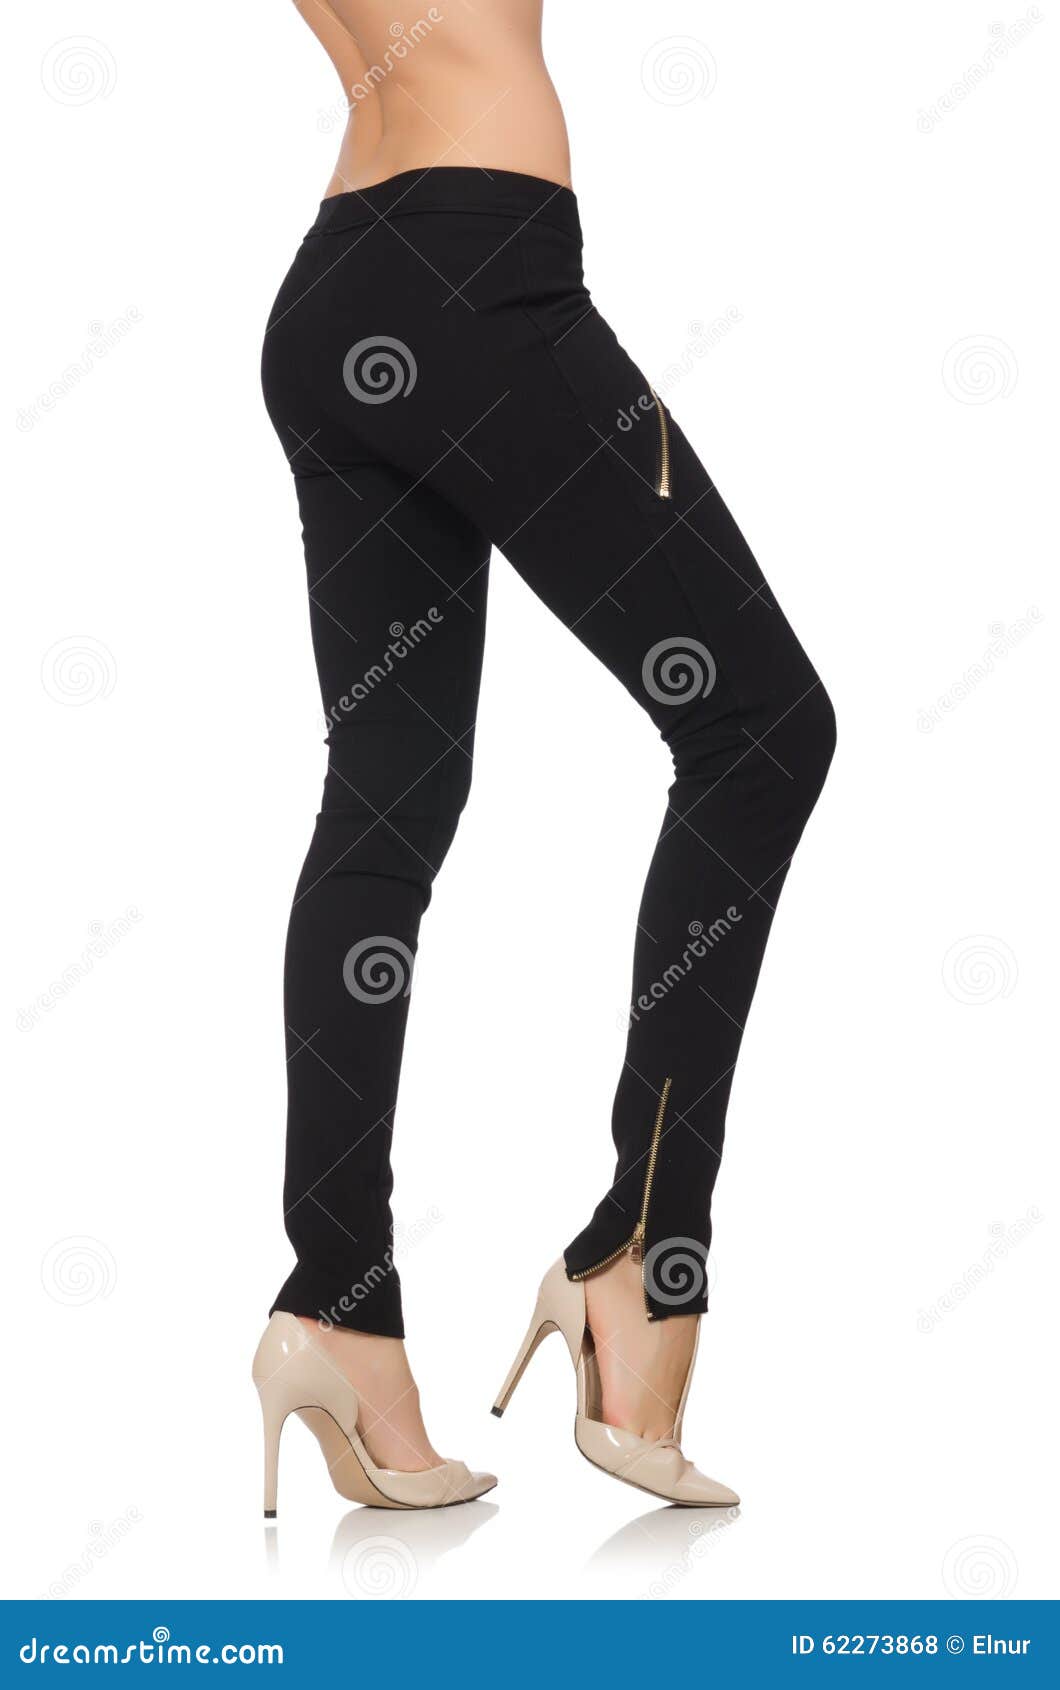 The Woman Legs Isolated on White Stock Photo - Image of fetish, high ...